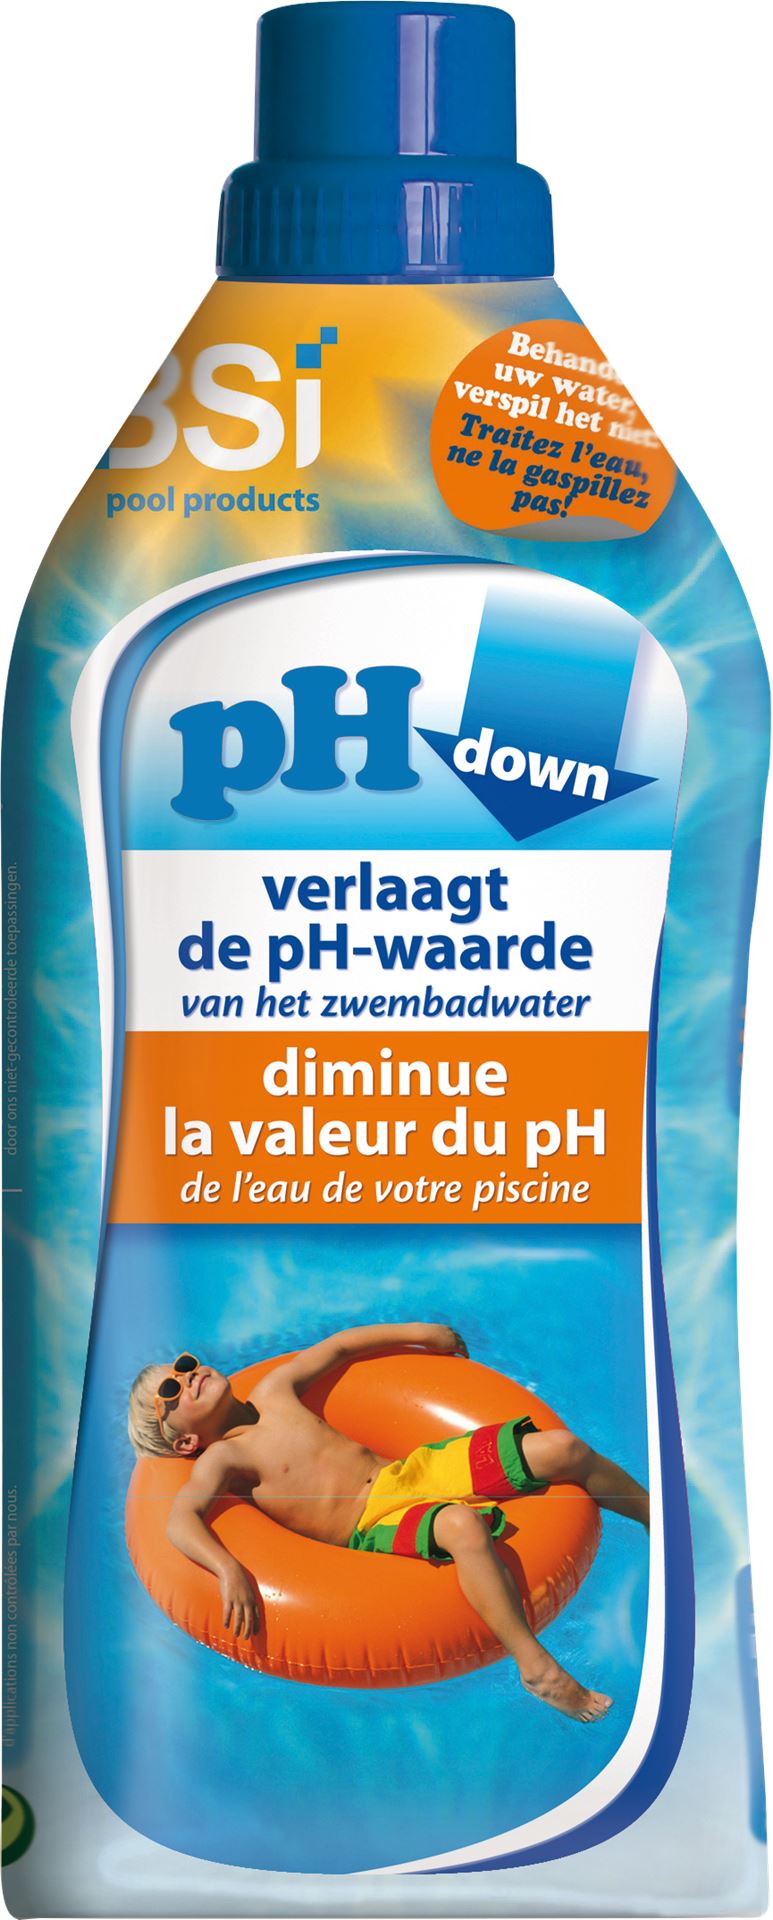 BSI pH Down liquid 1L - lowers the pH level of your pool or spa